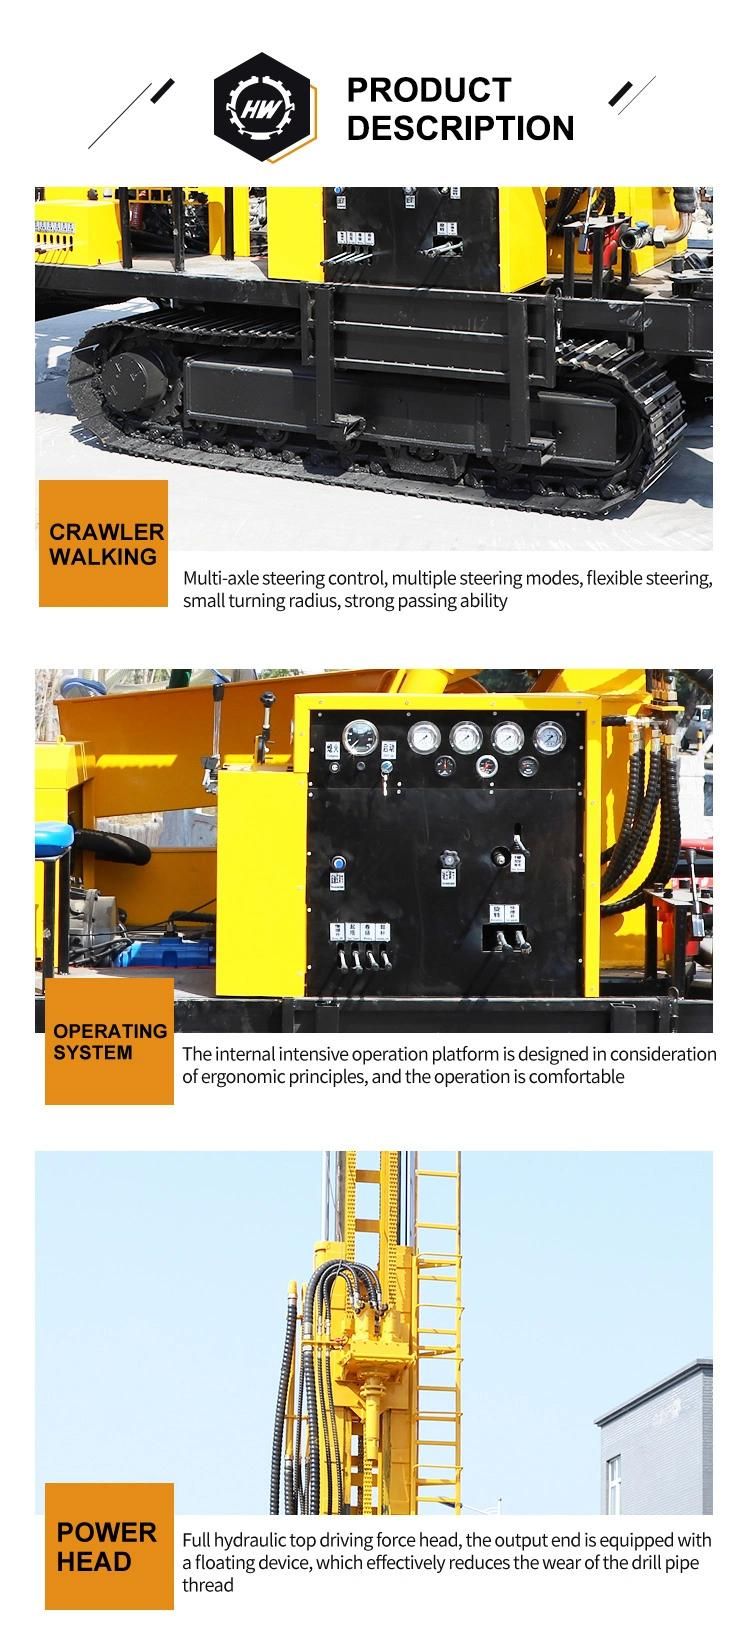 Vertical Shaft Borehole Water Boring Machine Water Well Drilling Rig Pneumatic Drilling Rig with Air Compressor Drilling Rigs